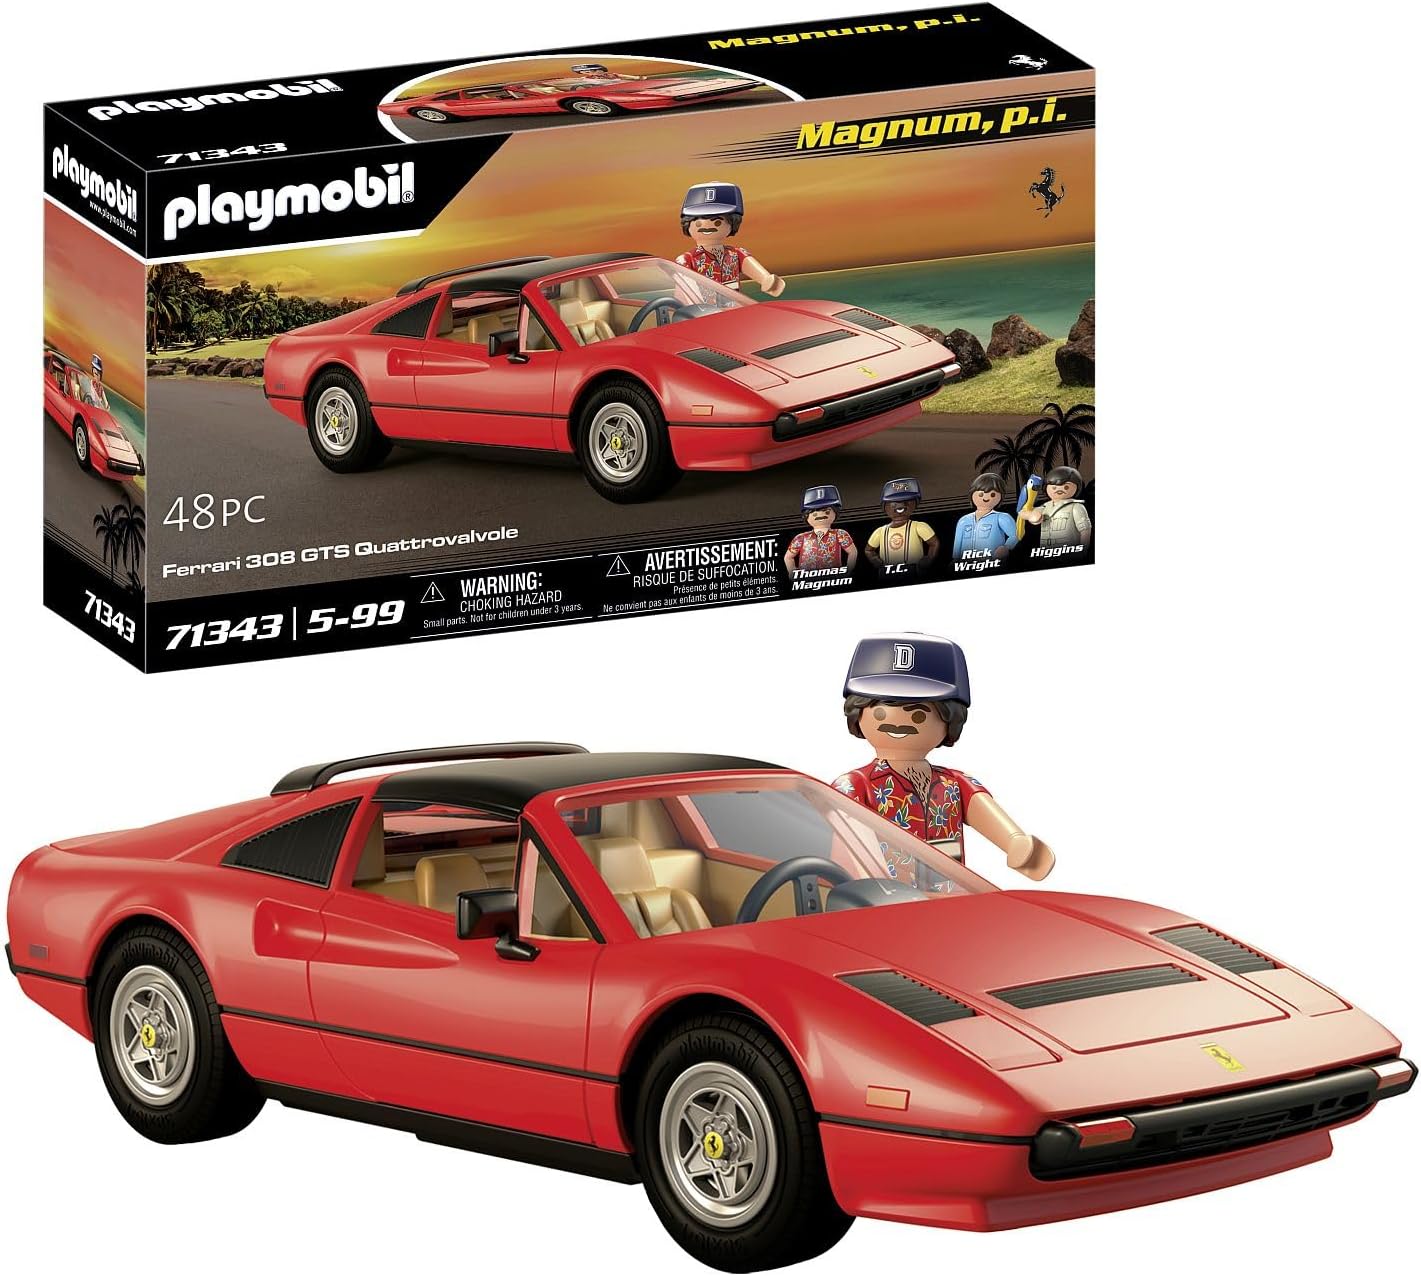 PLAYMOBIL Famous Cars 71343 Magnum, P.I. Ferrari 308 GTS Quattrovalvole, Super Sports Car, Collectible for Car Fans, Toy for Collectors and Children from 5 Years